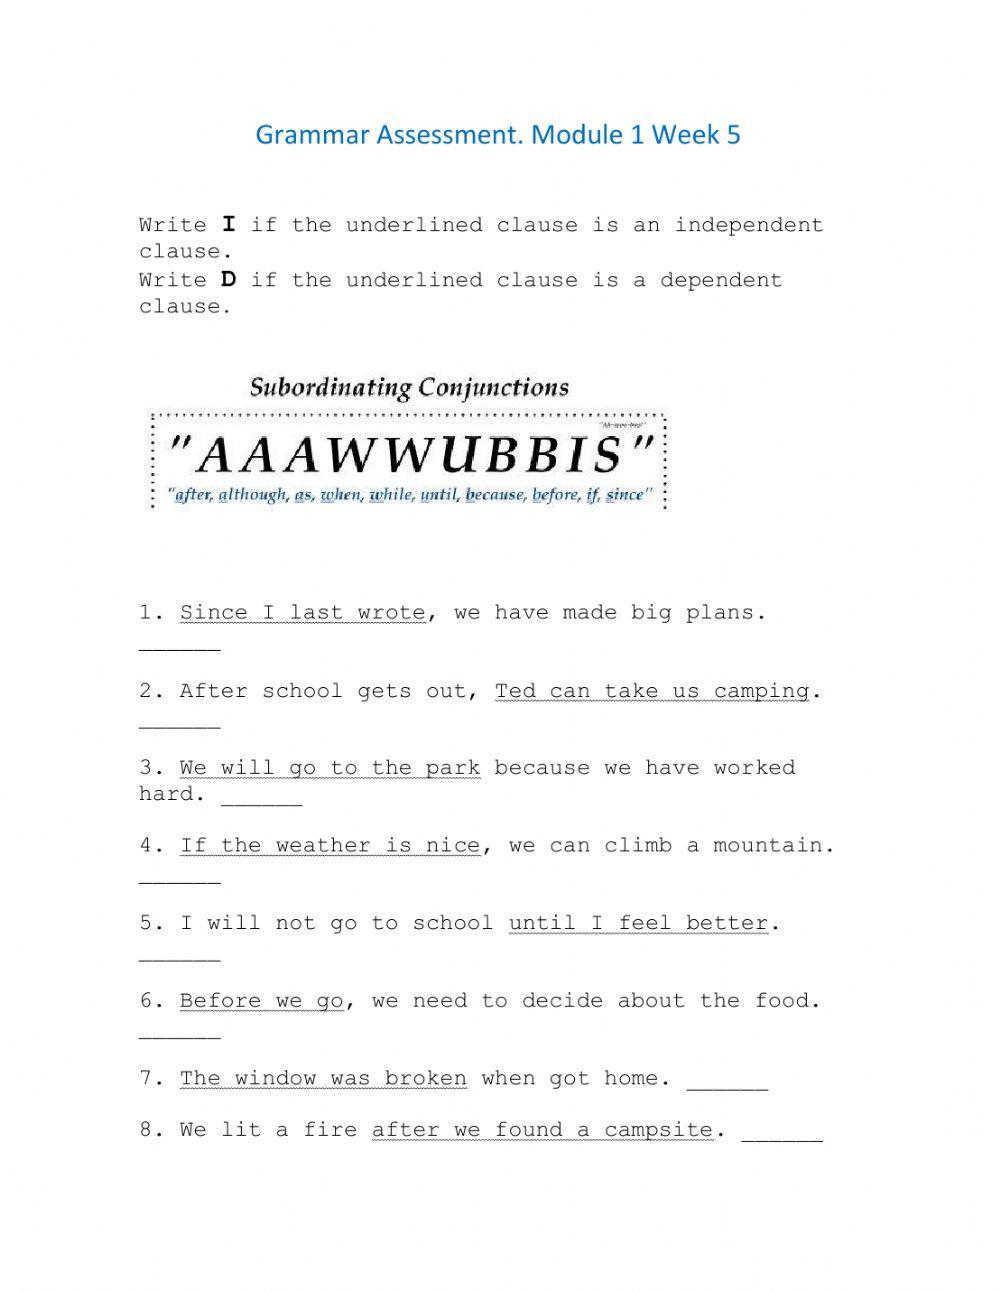 Clauses in complex sentences